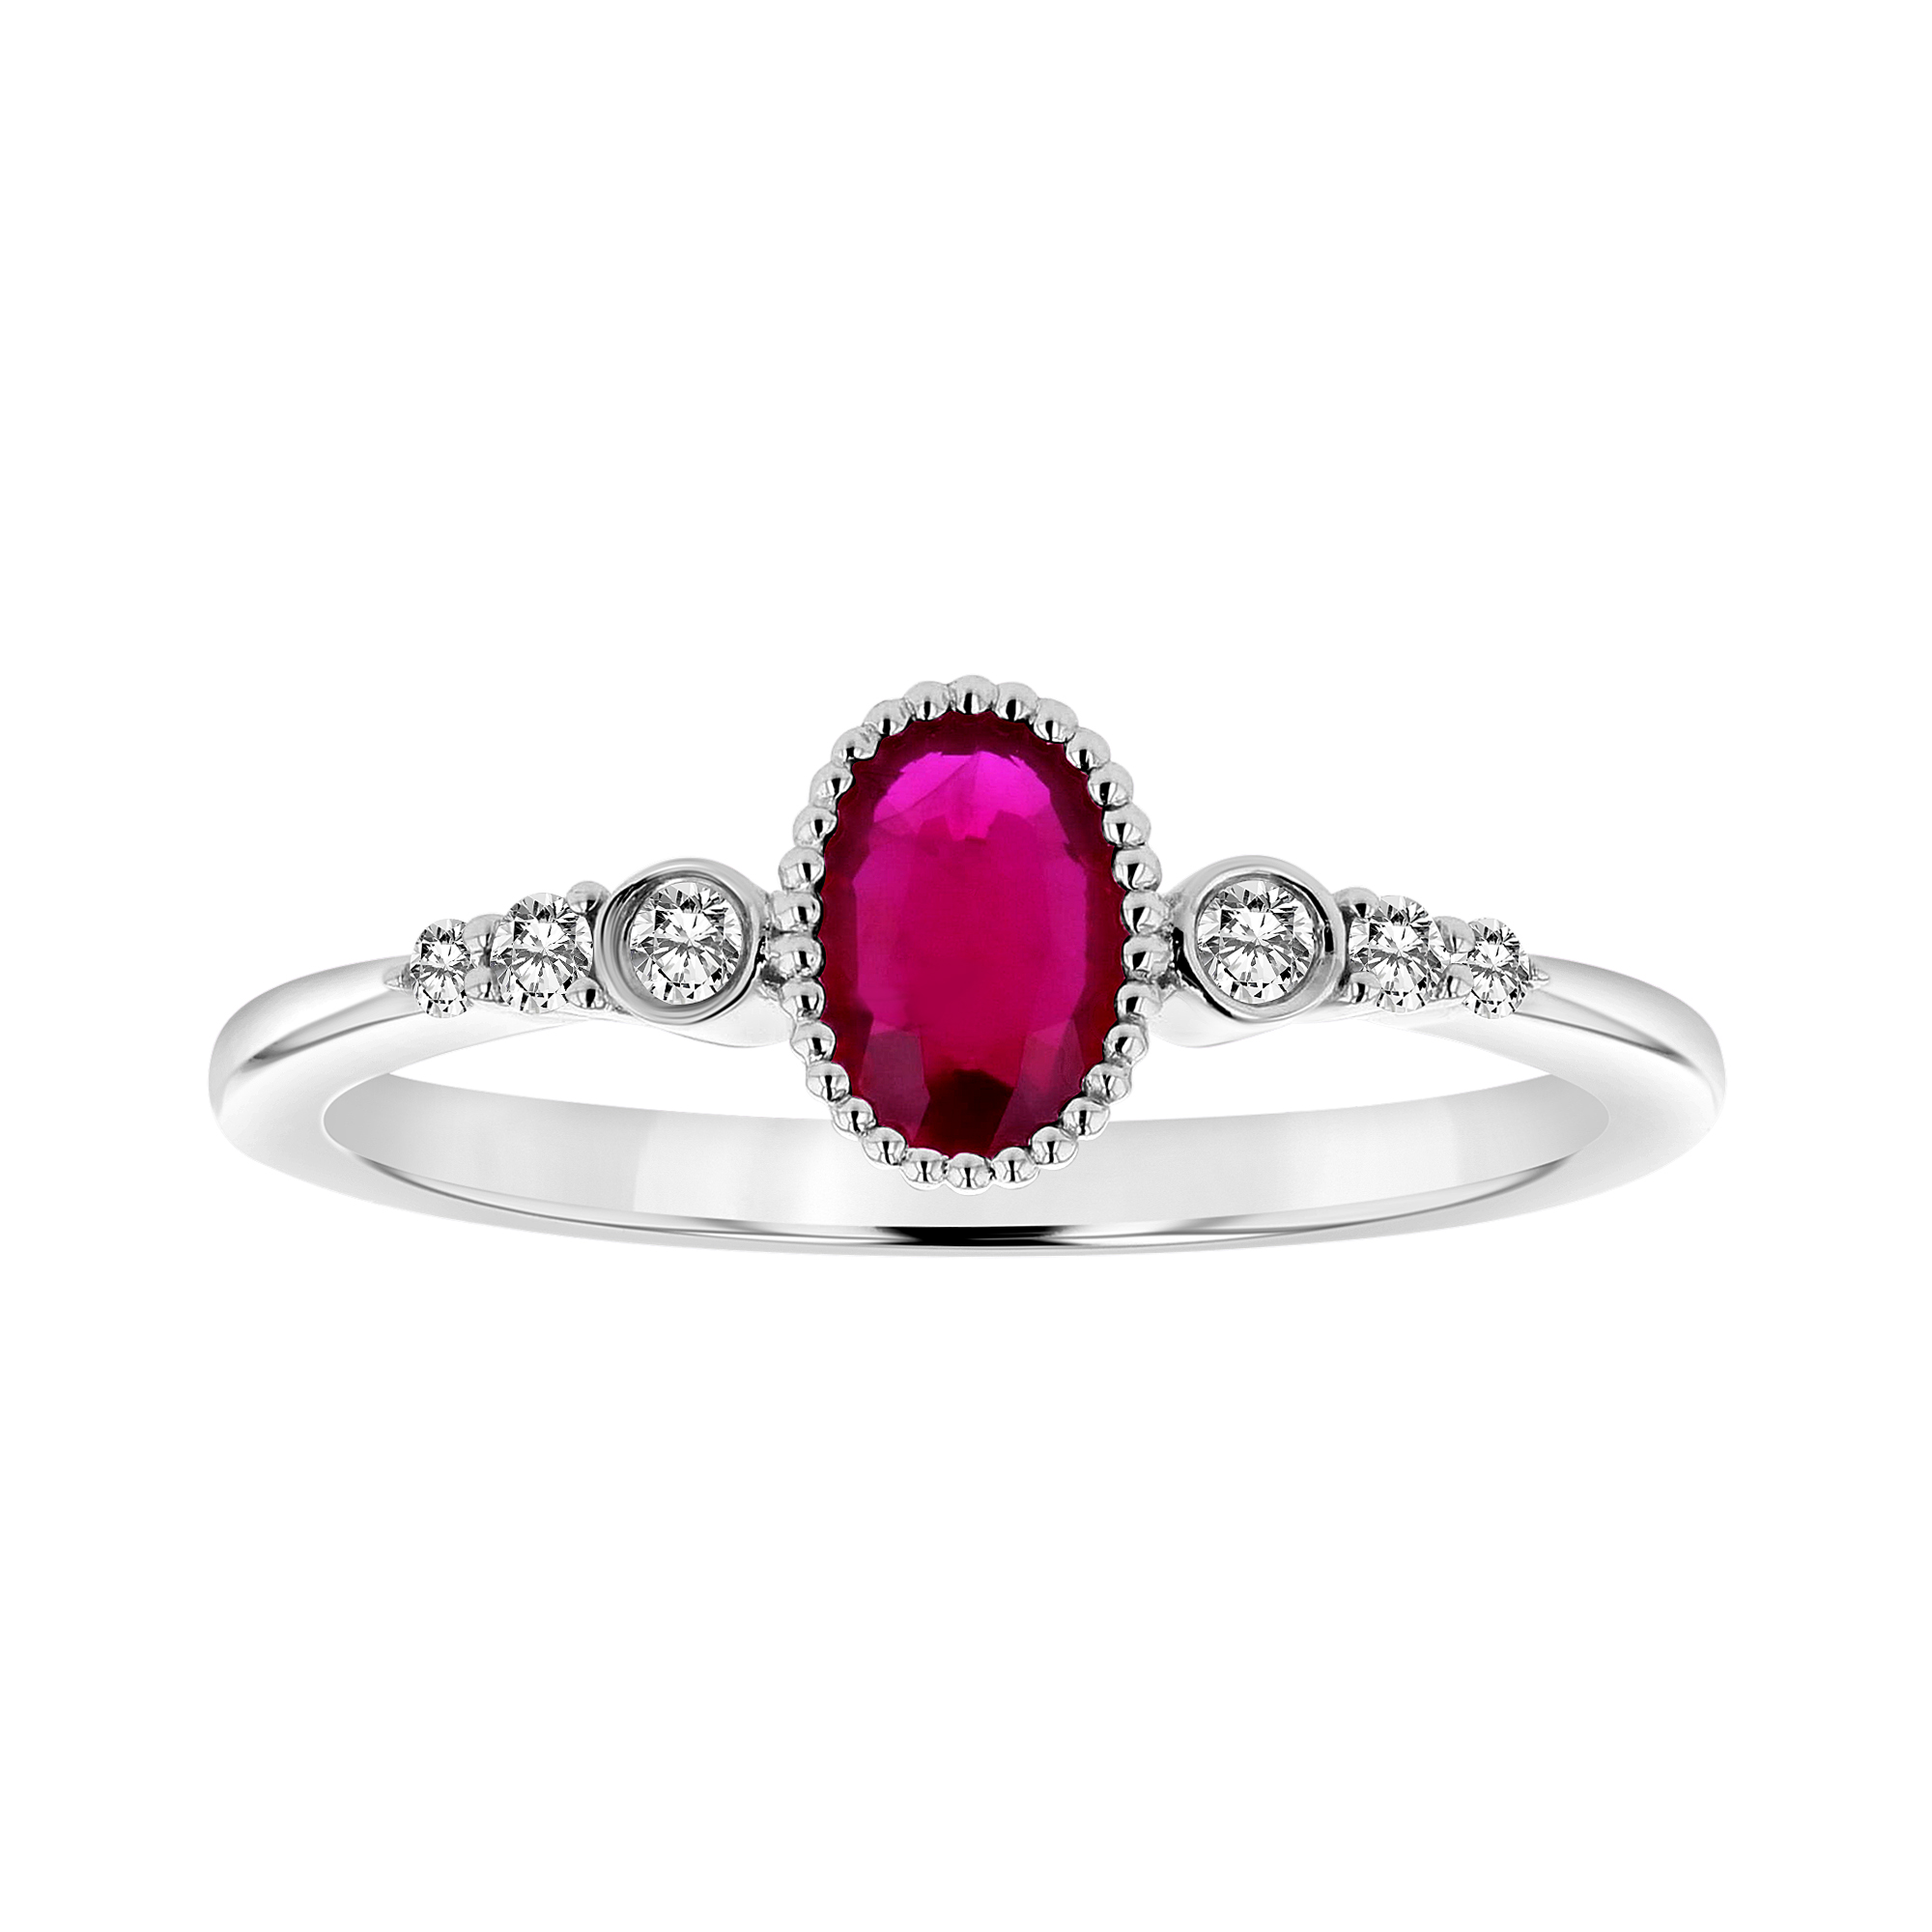 View 0.08ctw Diaond and Ruby Ring in 14k White Gold